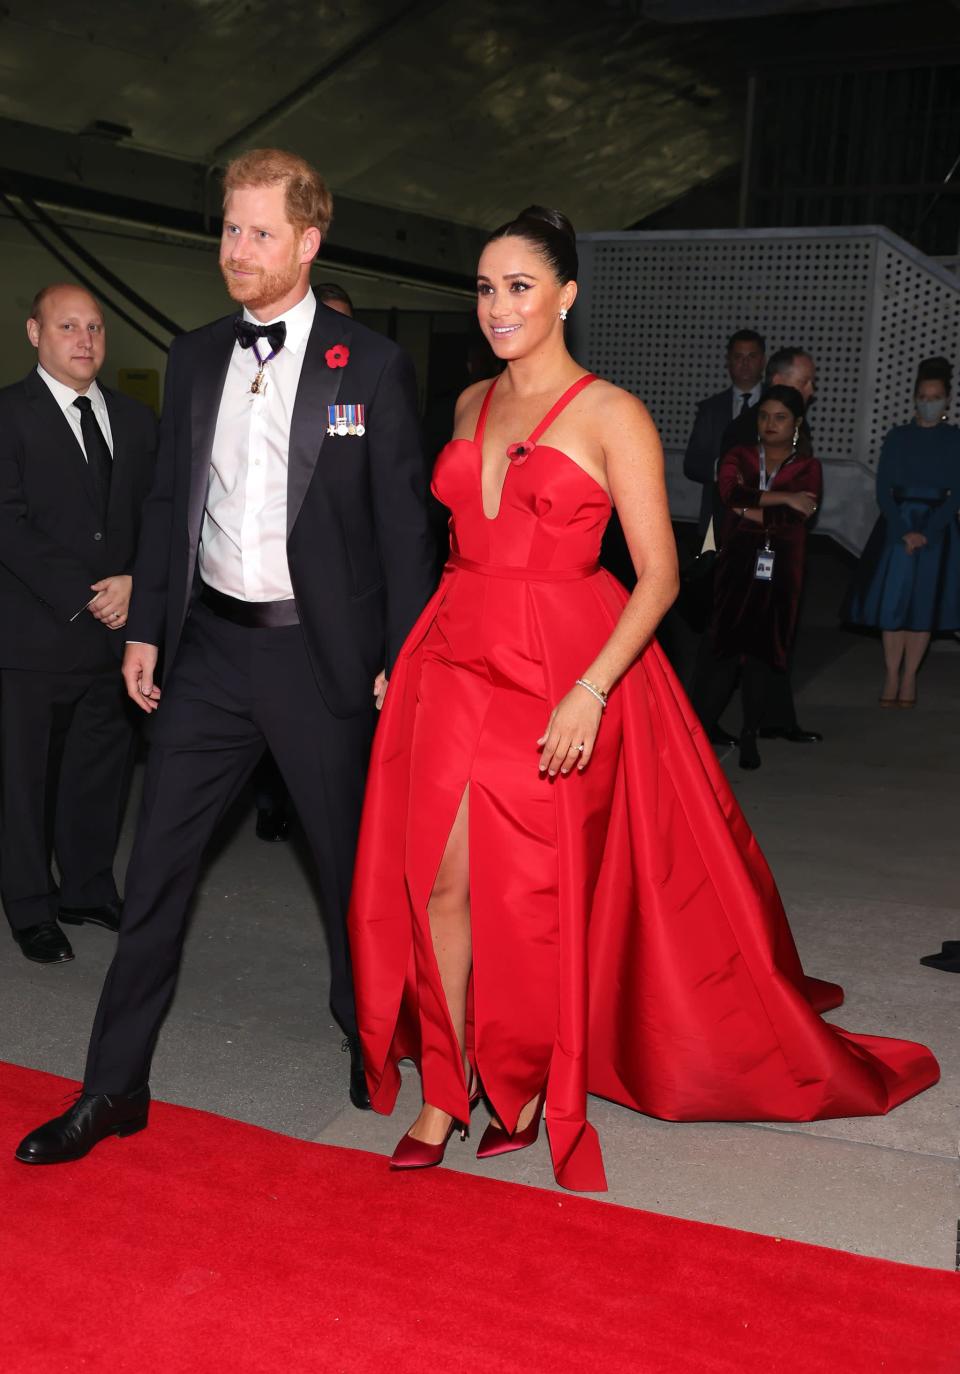 <p>All eyes were on Markle at the 2021 Freedom Gala when she donned a vibrant <a href="https://www.popsugar.com/fashion/meghan-markle-carolina-herrera-red-dress-freedom-gala-48599250" class="link " rel="nofollow noopener" target="_blank" data-ylk="slk:red gown">red gown</a> custom-made by Wes Gordon. The look featured a floor-sweeping train, thigh-high split, and plunging neckline, with Giuseppe Zanotti heels to match.</p>